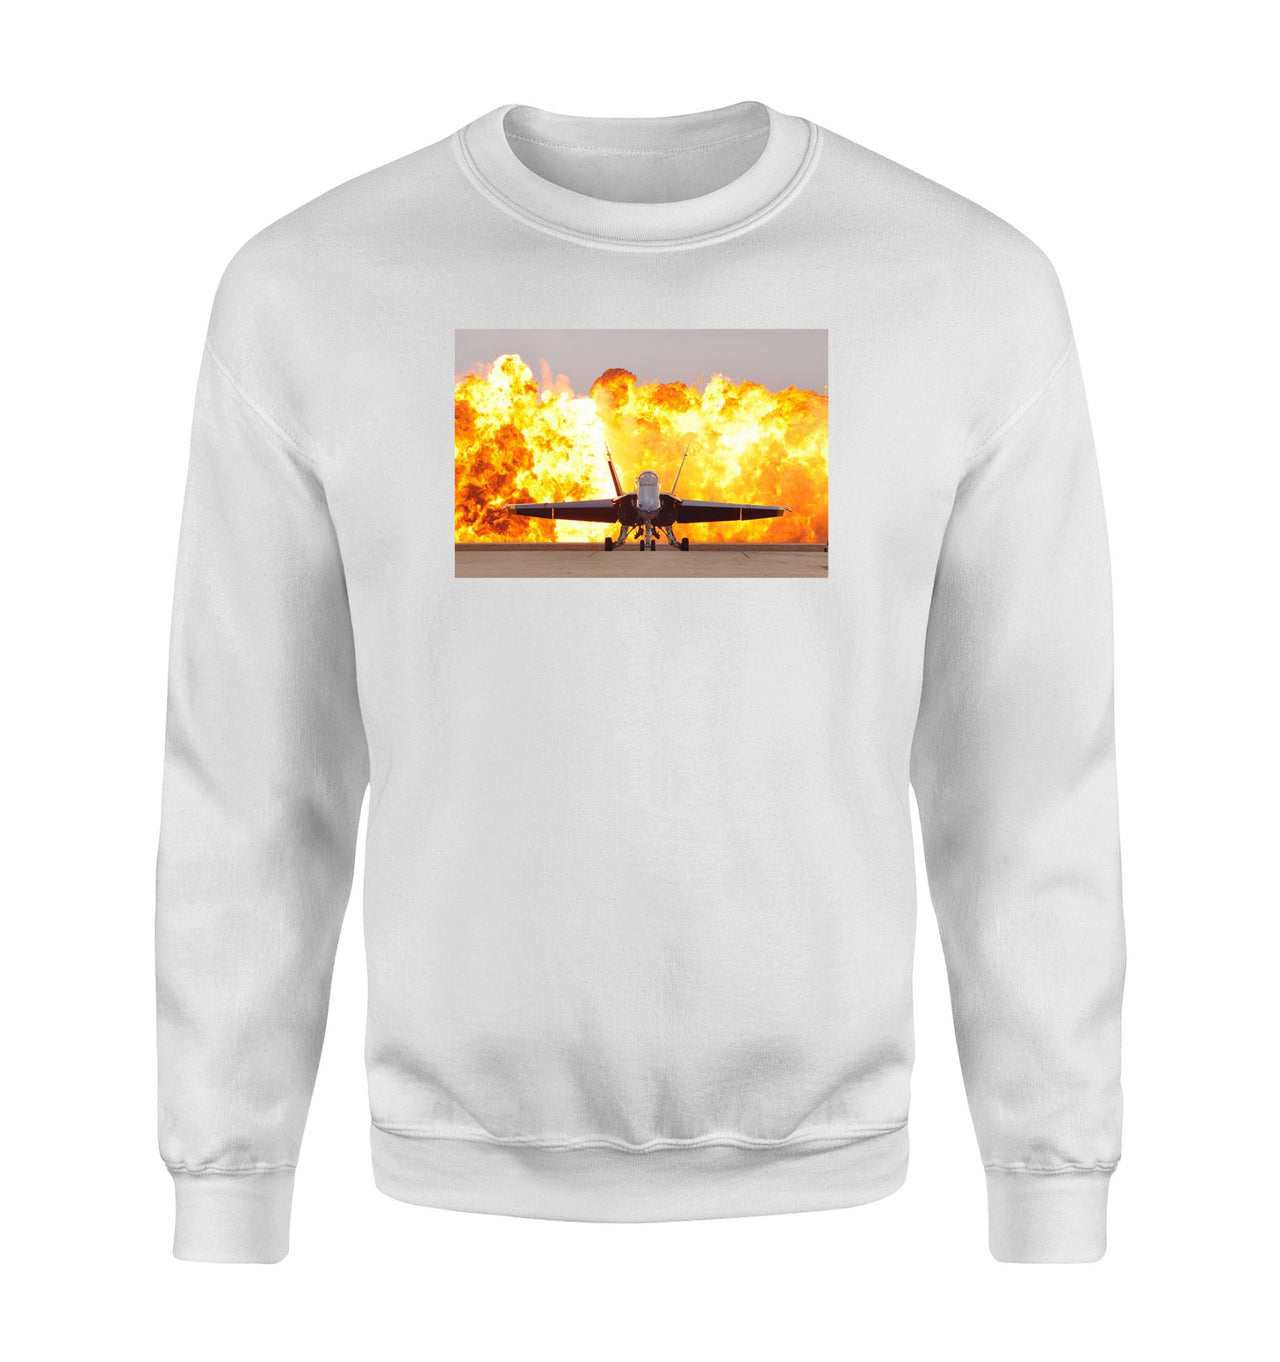 Face to Face with Air Force Jet & Flames Designed Sweatshirts